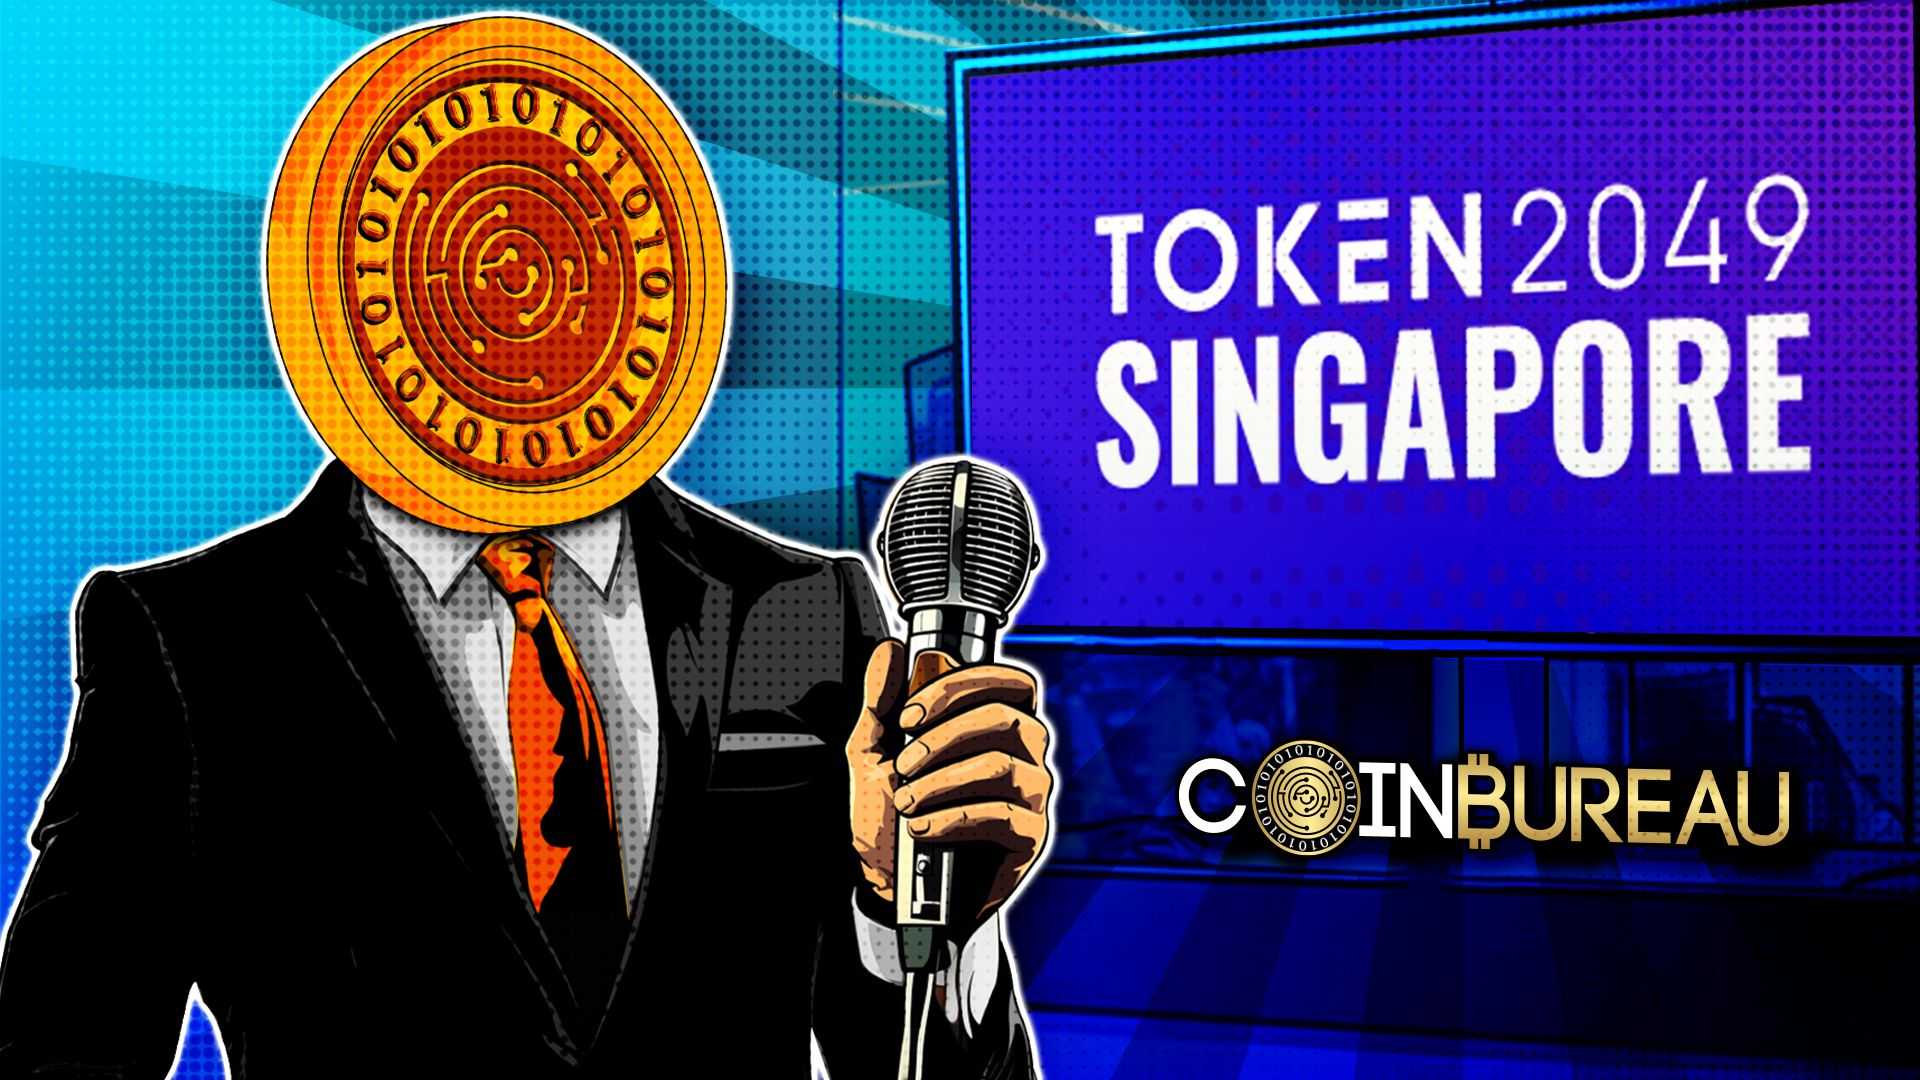 TOKEN2049- Sets Record With Over 10,000 Attendees